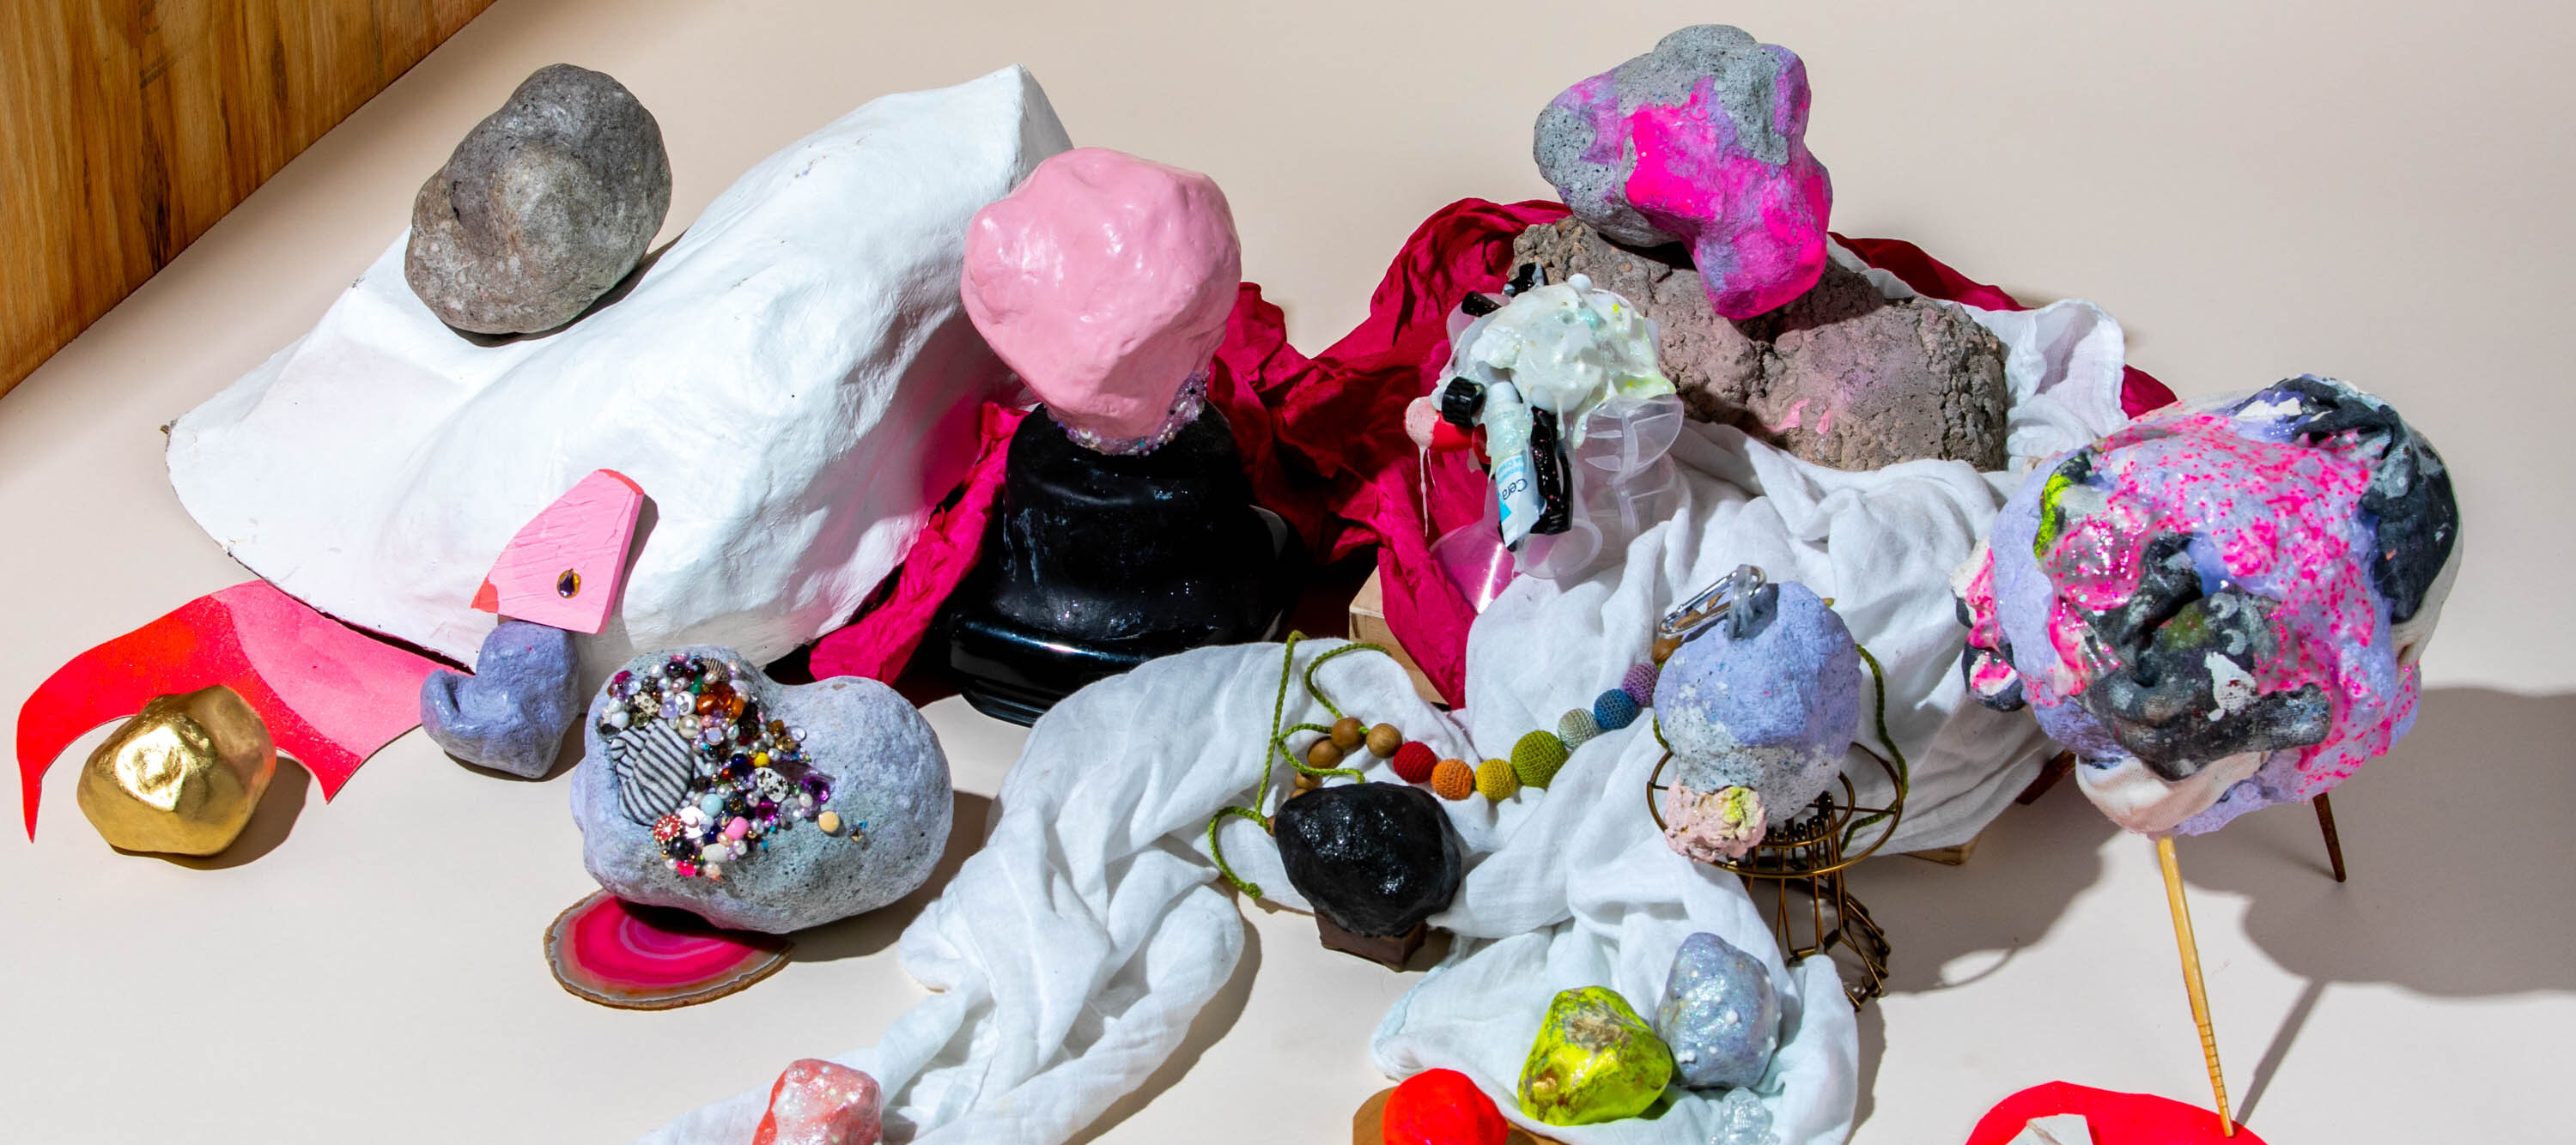 Header image: An assemblage of a variety of objects with different textures such as stones, textiles, beads, wood, and paper. The objects are painted mainly in red and pink colors and stacked on top of each other, creating a chaotic, colorful scene.